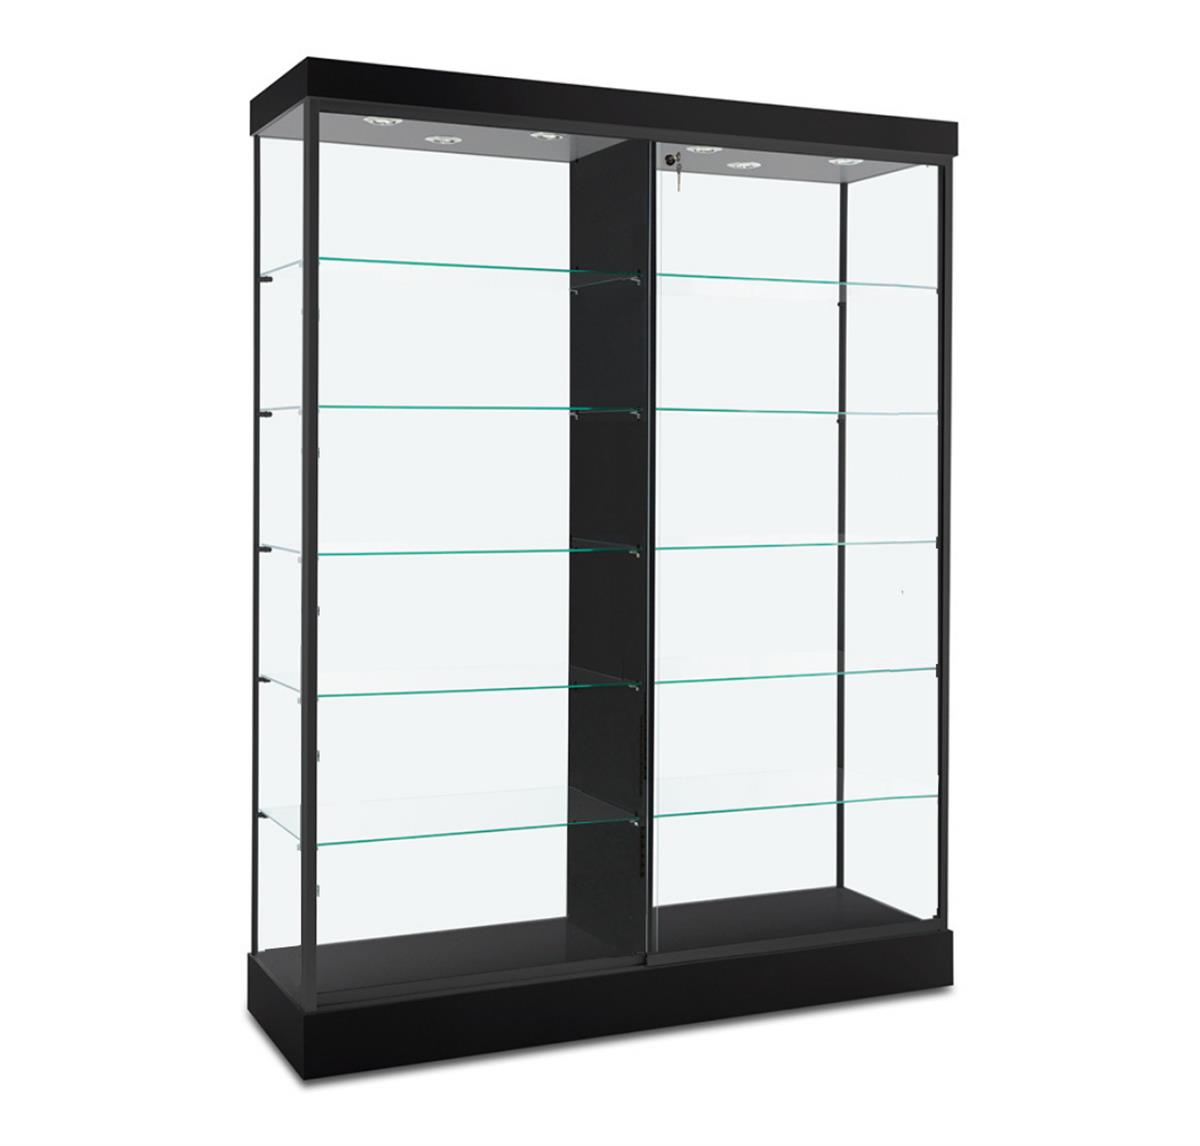 Extra Vision Economy Display Case 70 inches with light